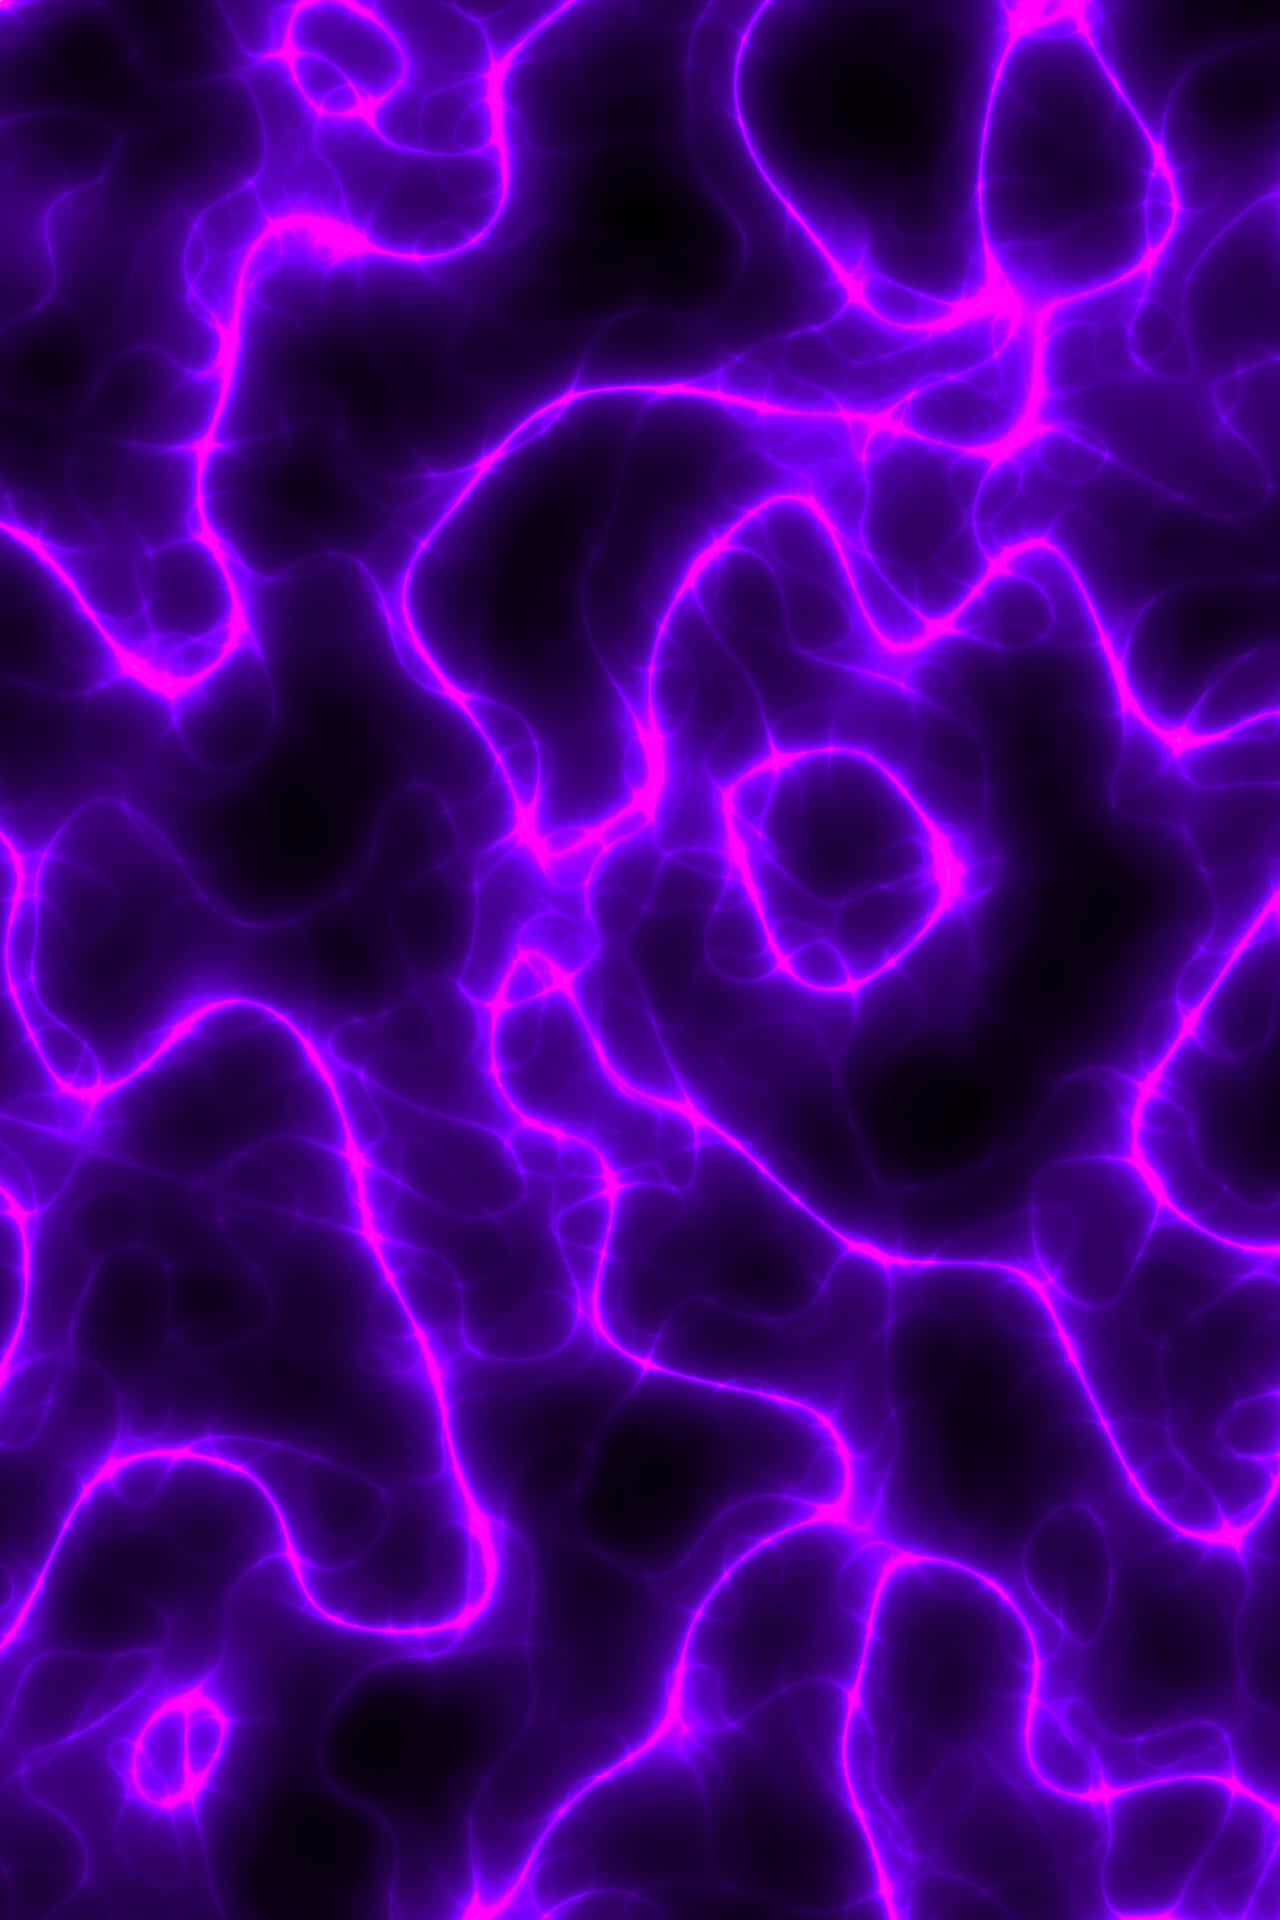 Black and purple background with an abstract design